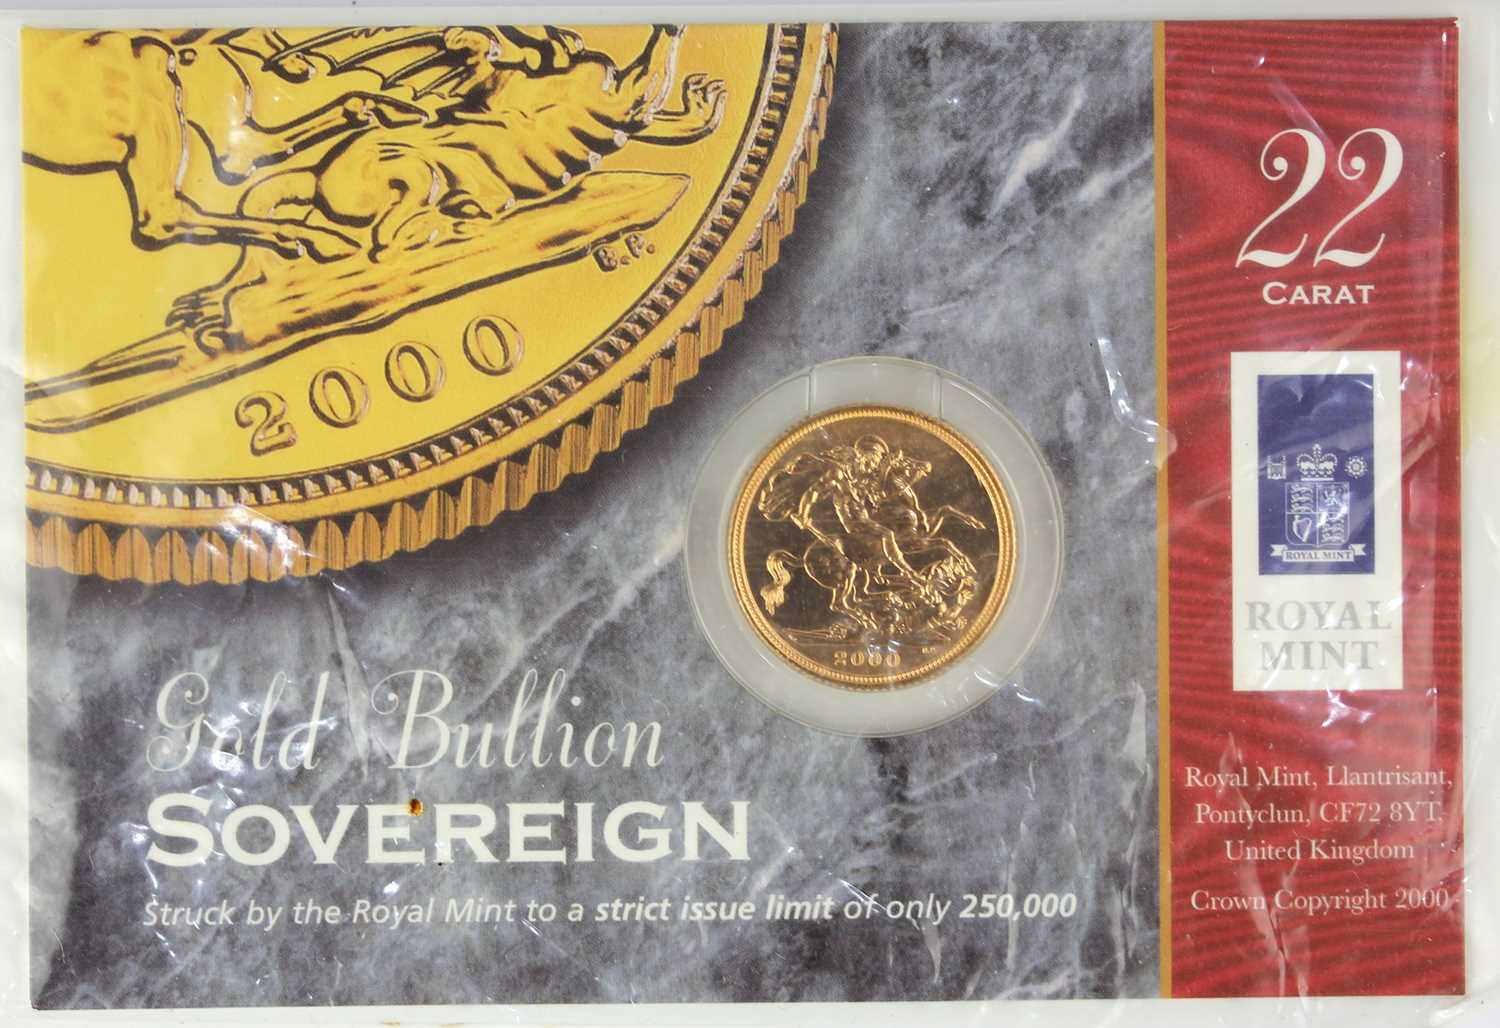 A Royal Mint gold bullion proof sovereign dated 2000 on card mount, in cellophane wrapper